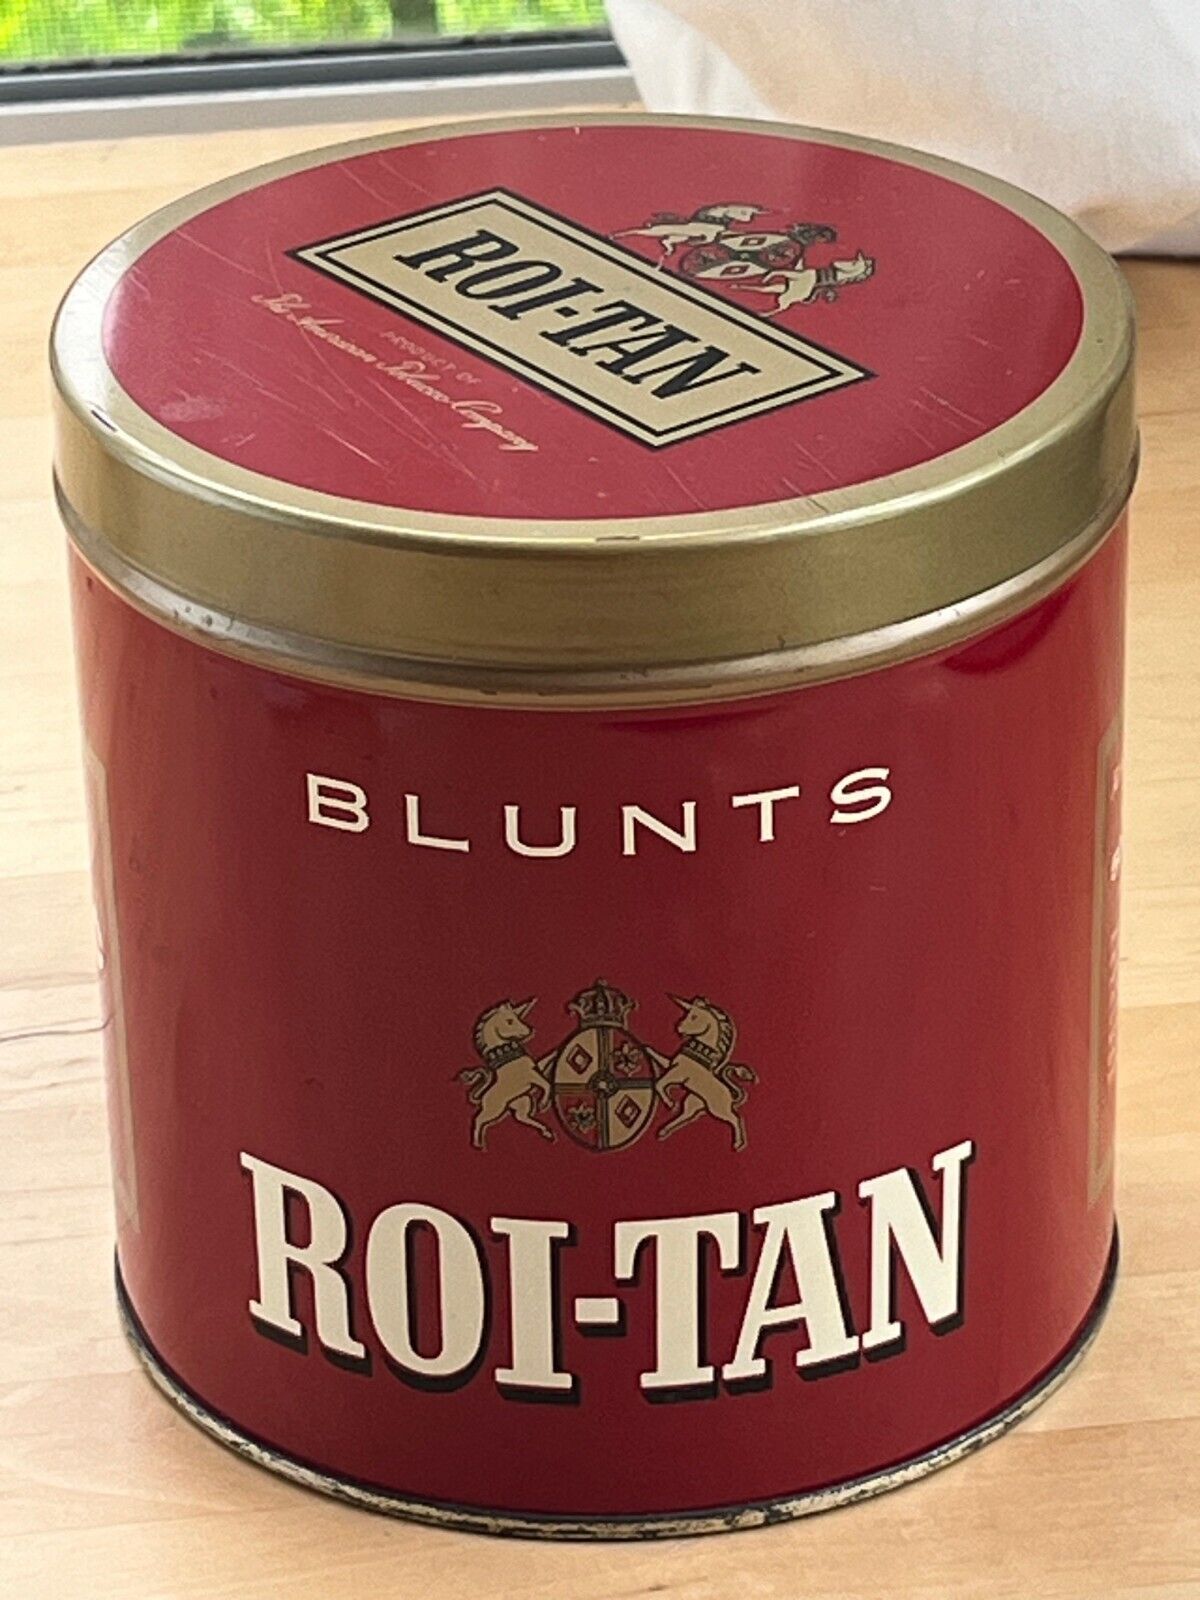 Vintage The American Tobacco Company Roi-Tan Blunts Metal Can 5.25\